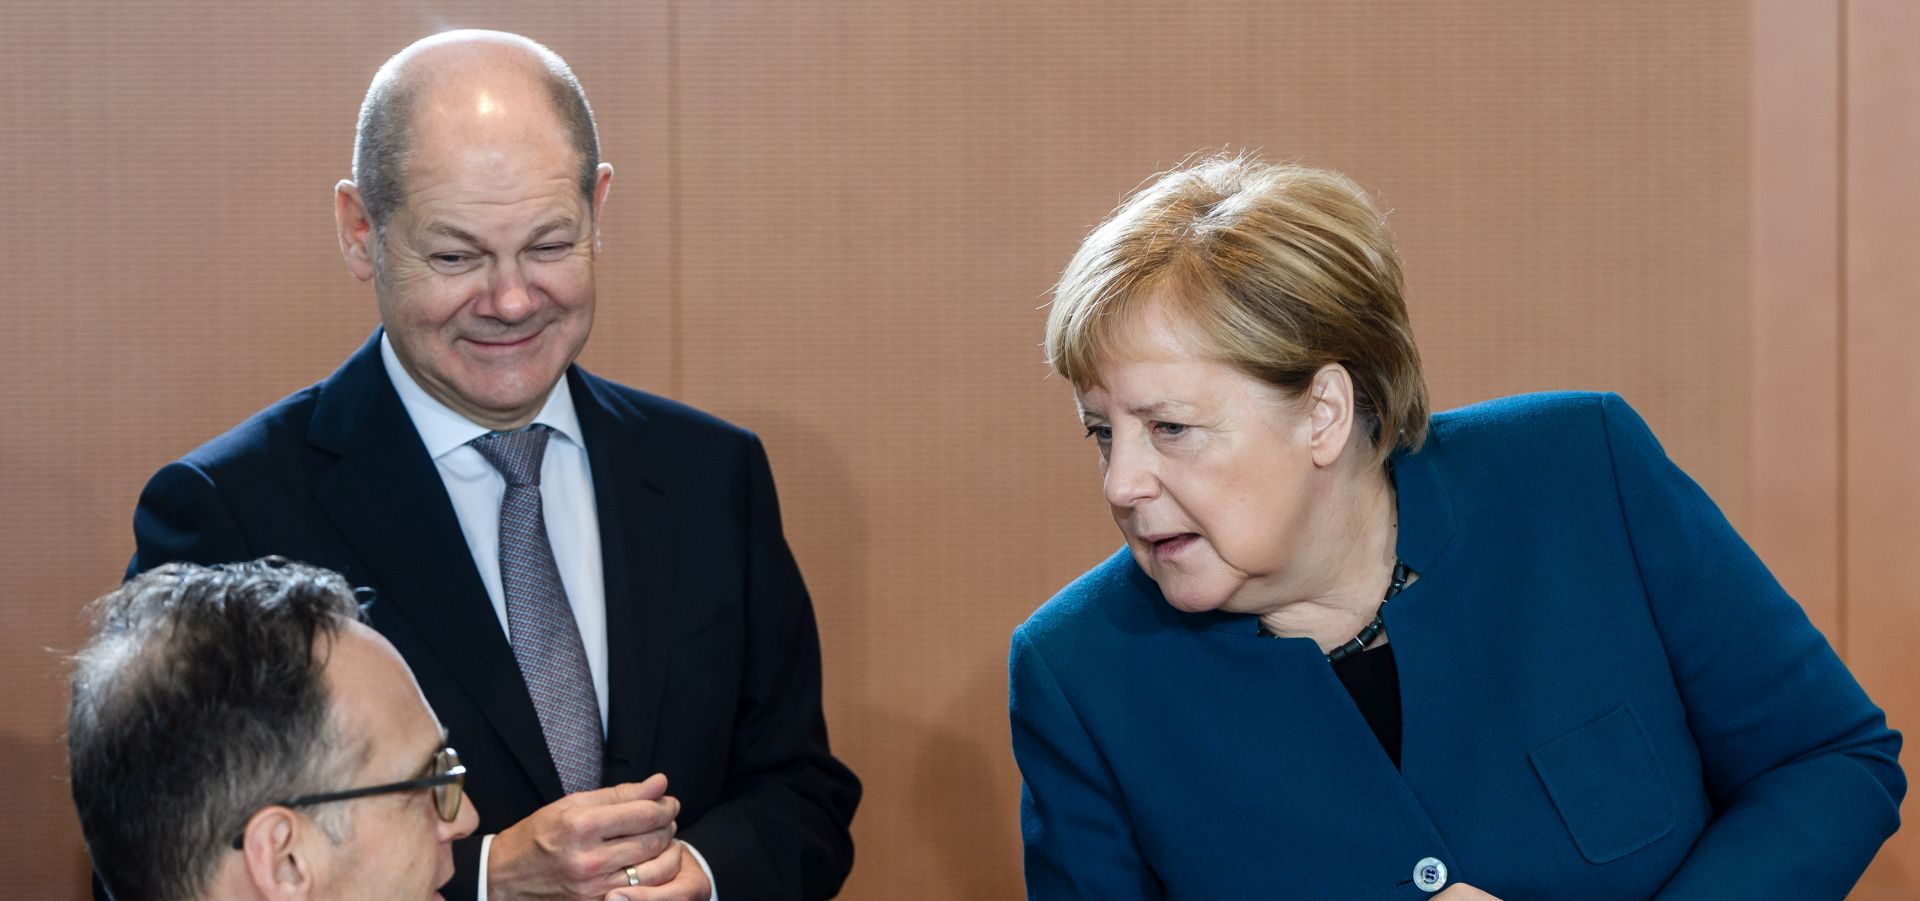 epa07975789 German Chancellor Angela Merkel (R) and German Foreign Minister Heiko Maas (L) talk next to German Minister of Finance Olaf Scholz (2-L) during the beginning of the weekly meeting of the German Federal cabinet at the Chancellery in Berlin, Germany, 06 November 2019. During the 47th cabinet meeting, the ministers and the Chancellor are expected to discuss, among other topics, the inventory of the implementation of the coalition contract.  EPA/CLEMENS BILAN